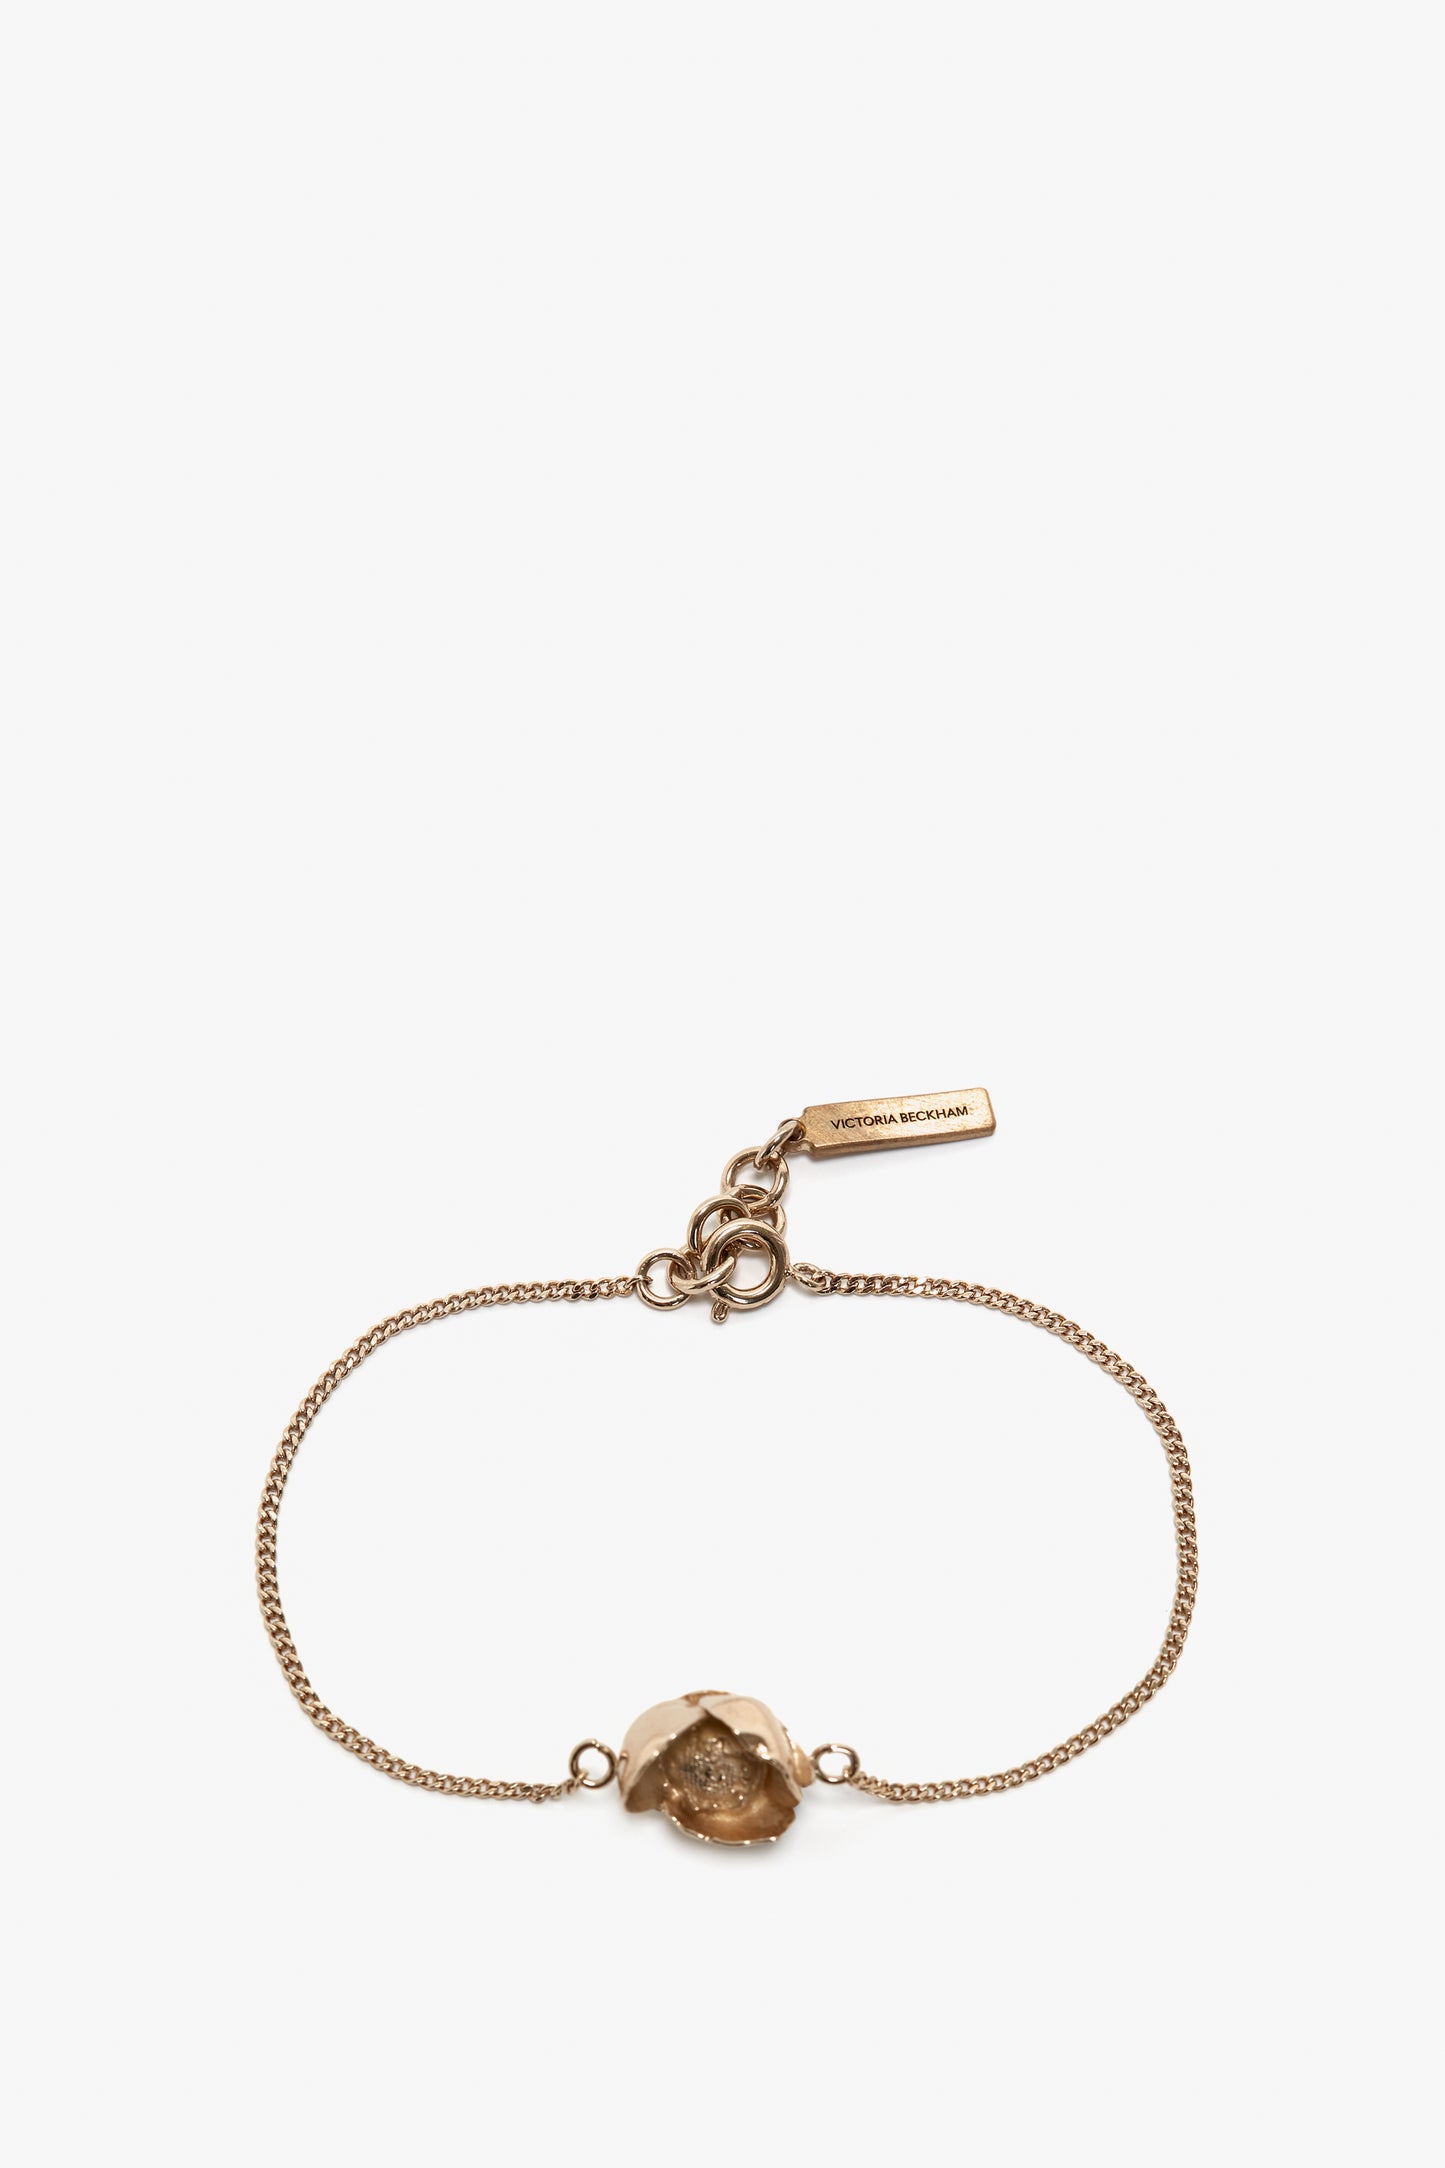 A delicate gold bracelet with a central stone and a small tag bearing the inscription "Victoria Beckham," featuring an adjustable chain for the perfect fit, the Exclusive Camellia Flower Bracelet In Gold.